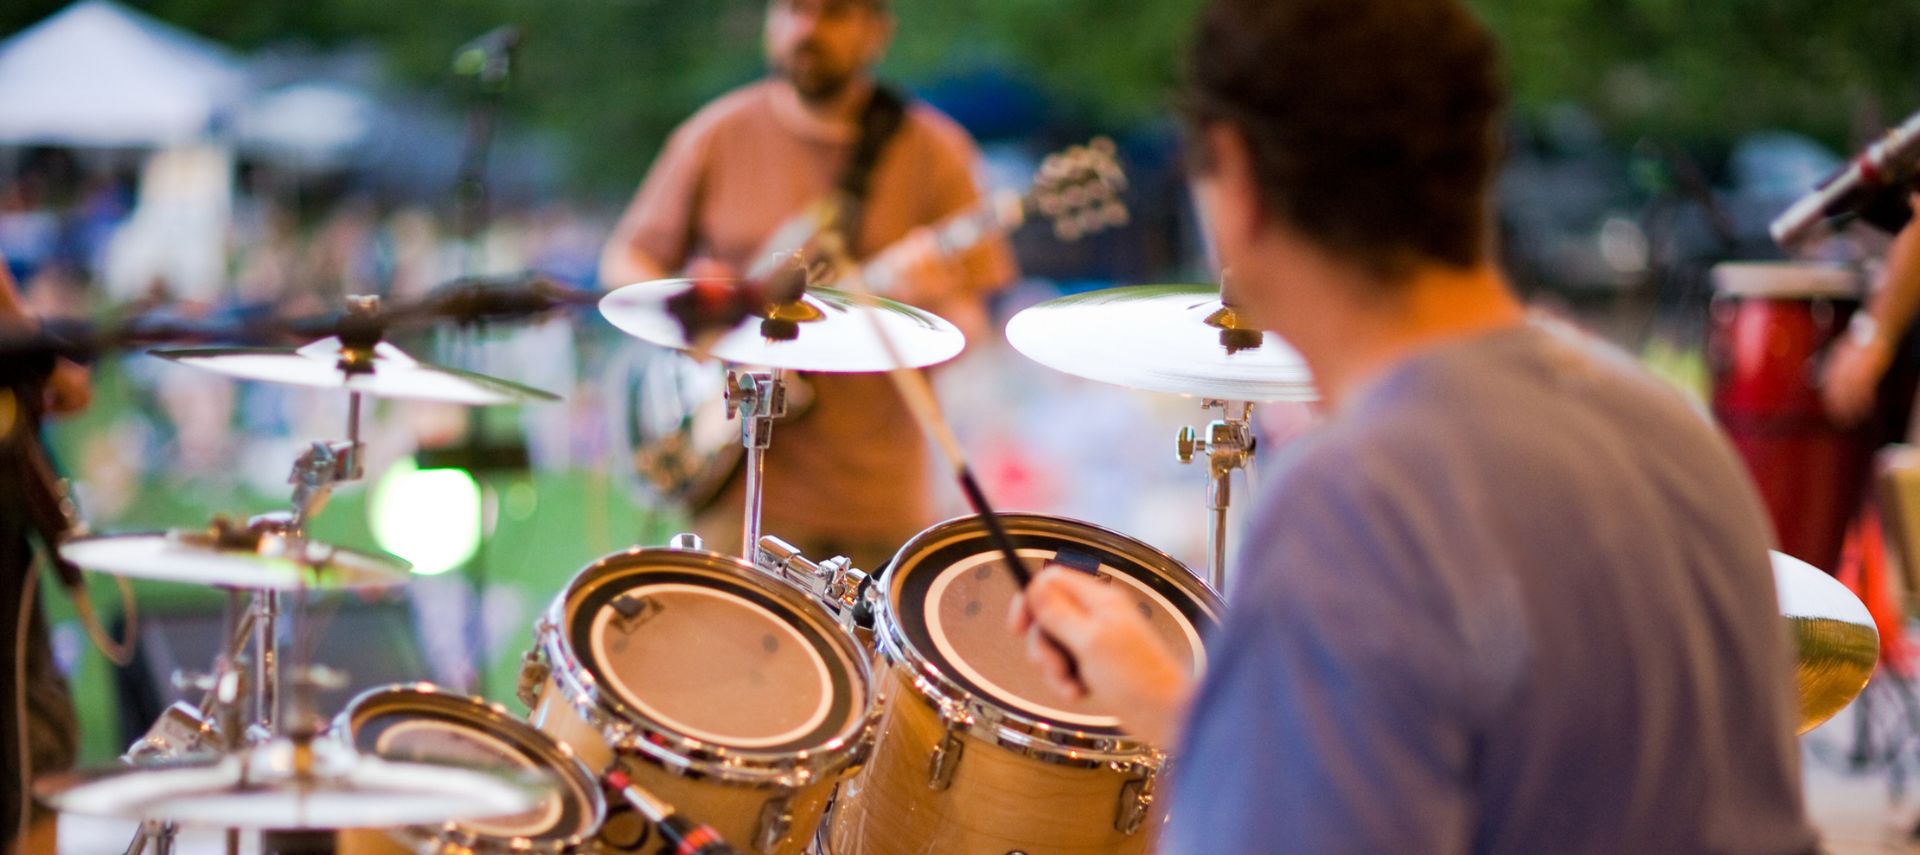 person playing drums at an outdoor venue